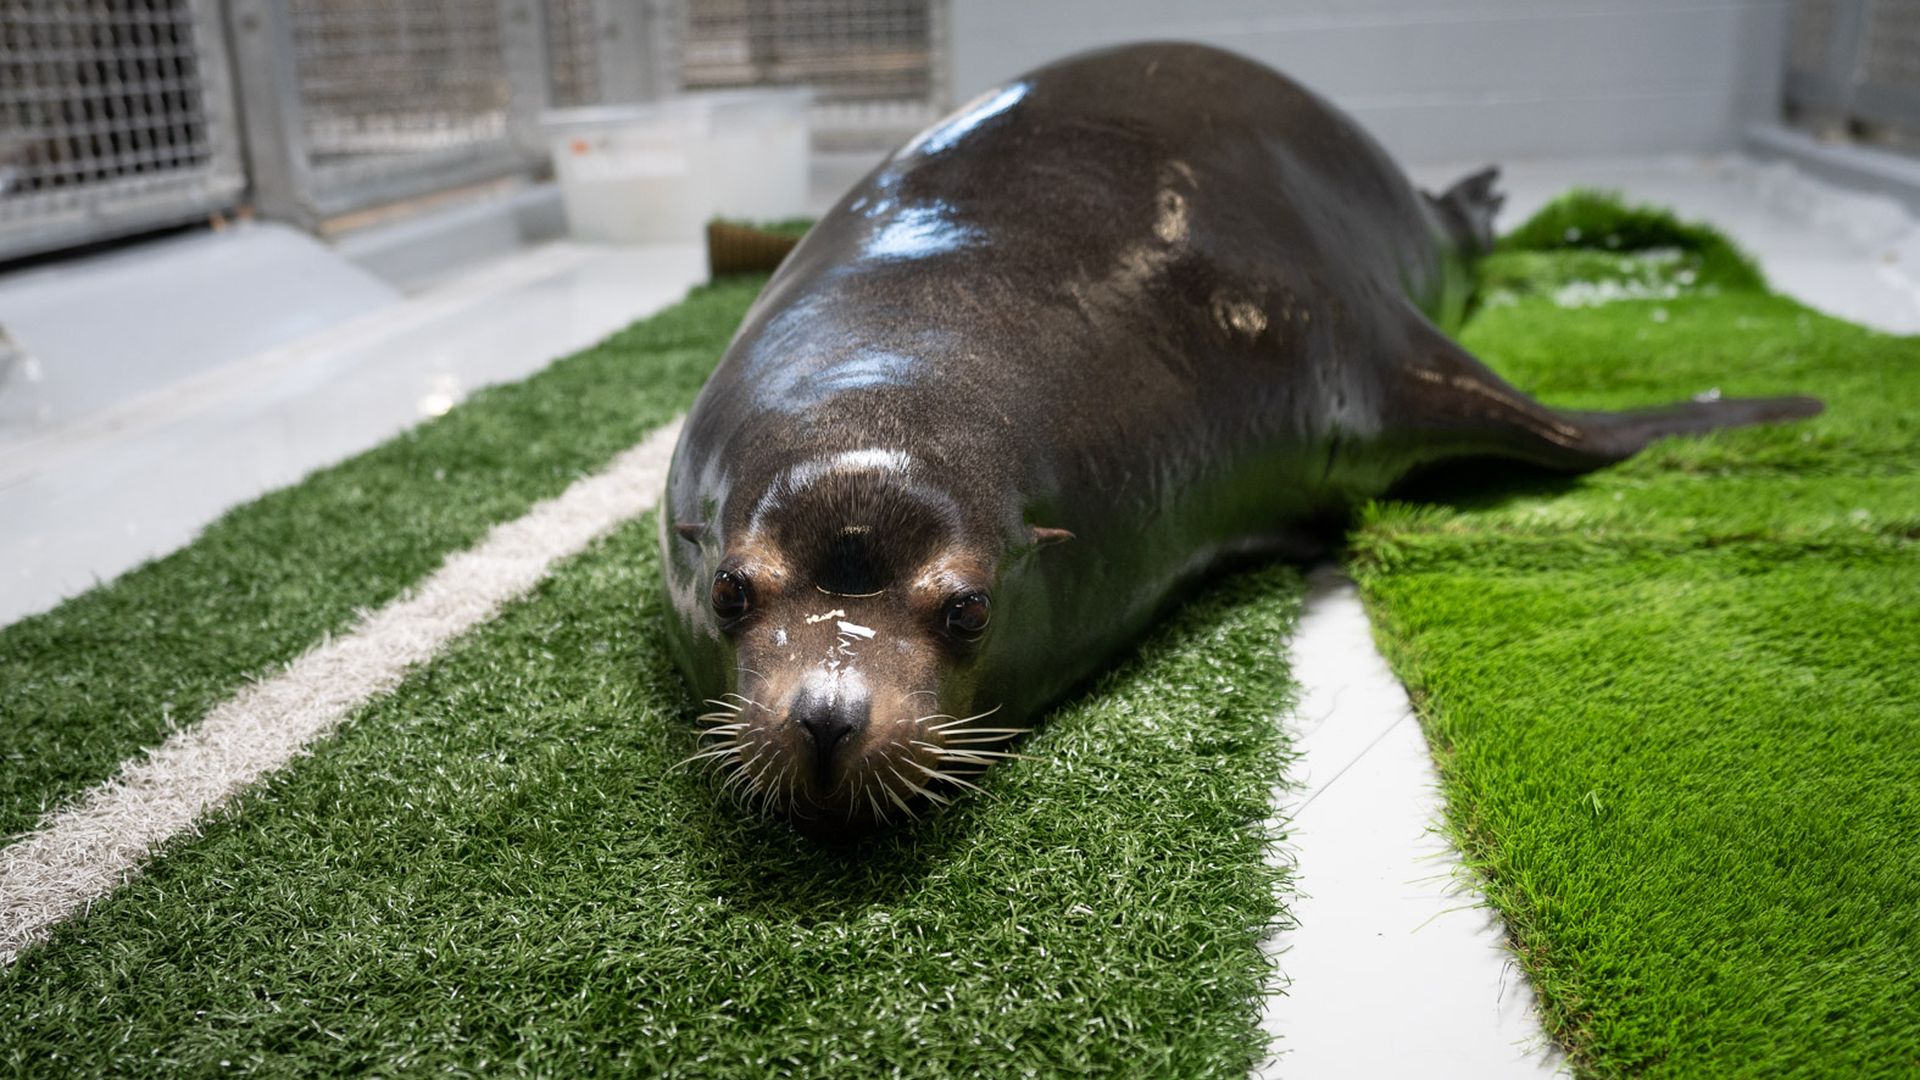 A sea lion rests on turf